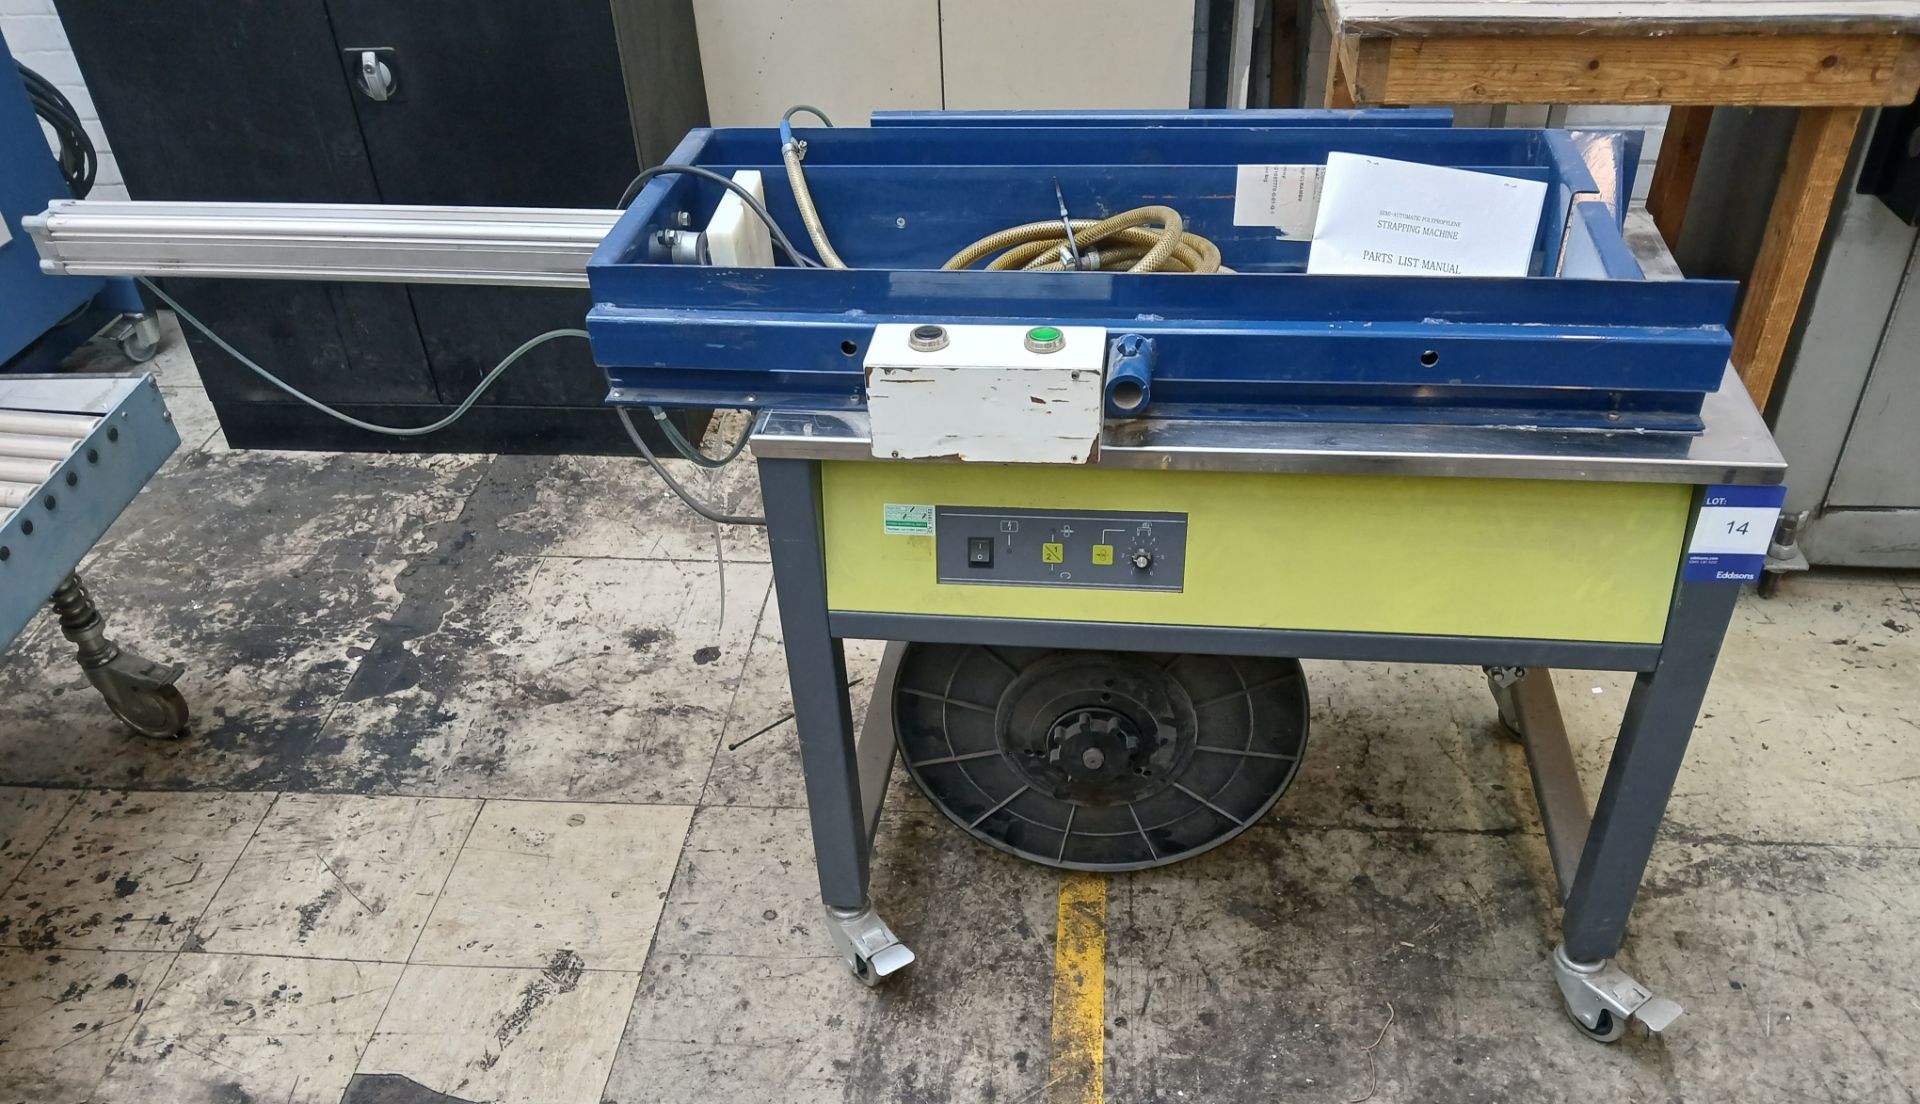 EXS 206 strapping machine, Serial Number S15128389